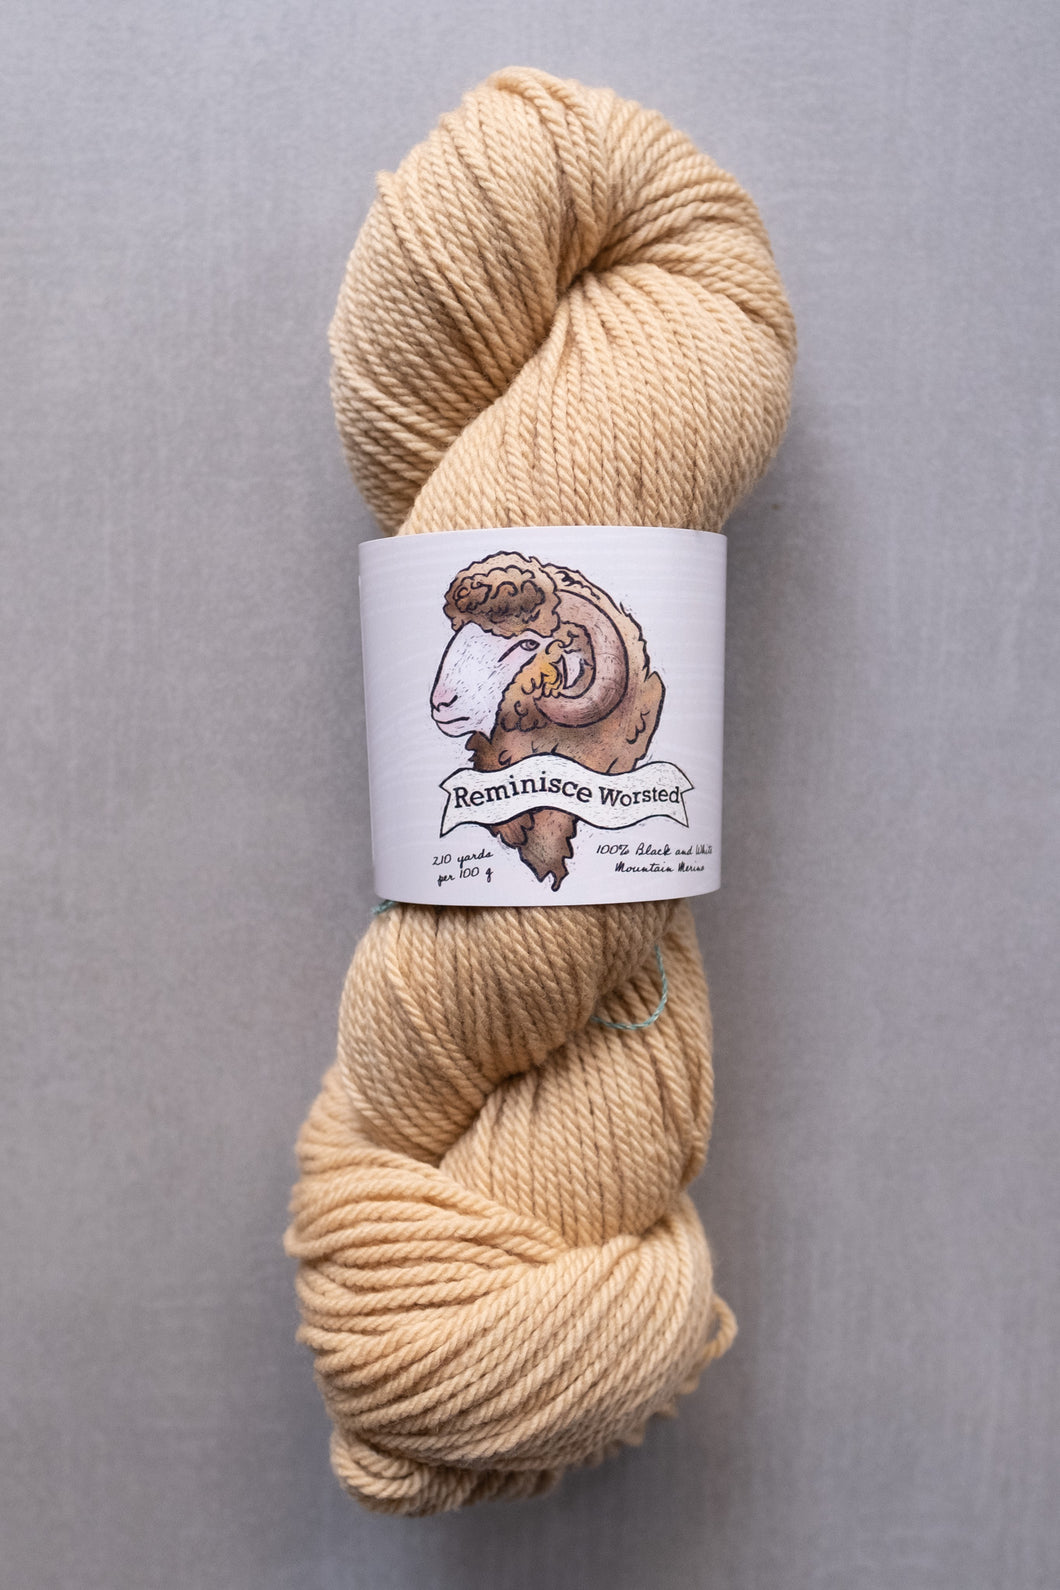 Reminisce Worsted - The Farmer's Daughter Fibers